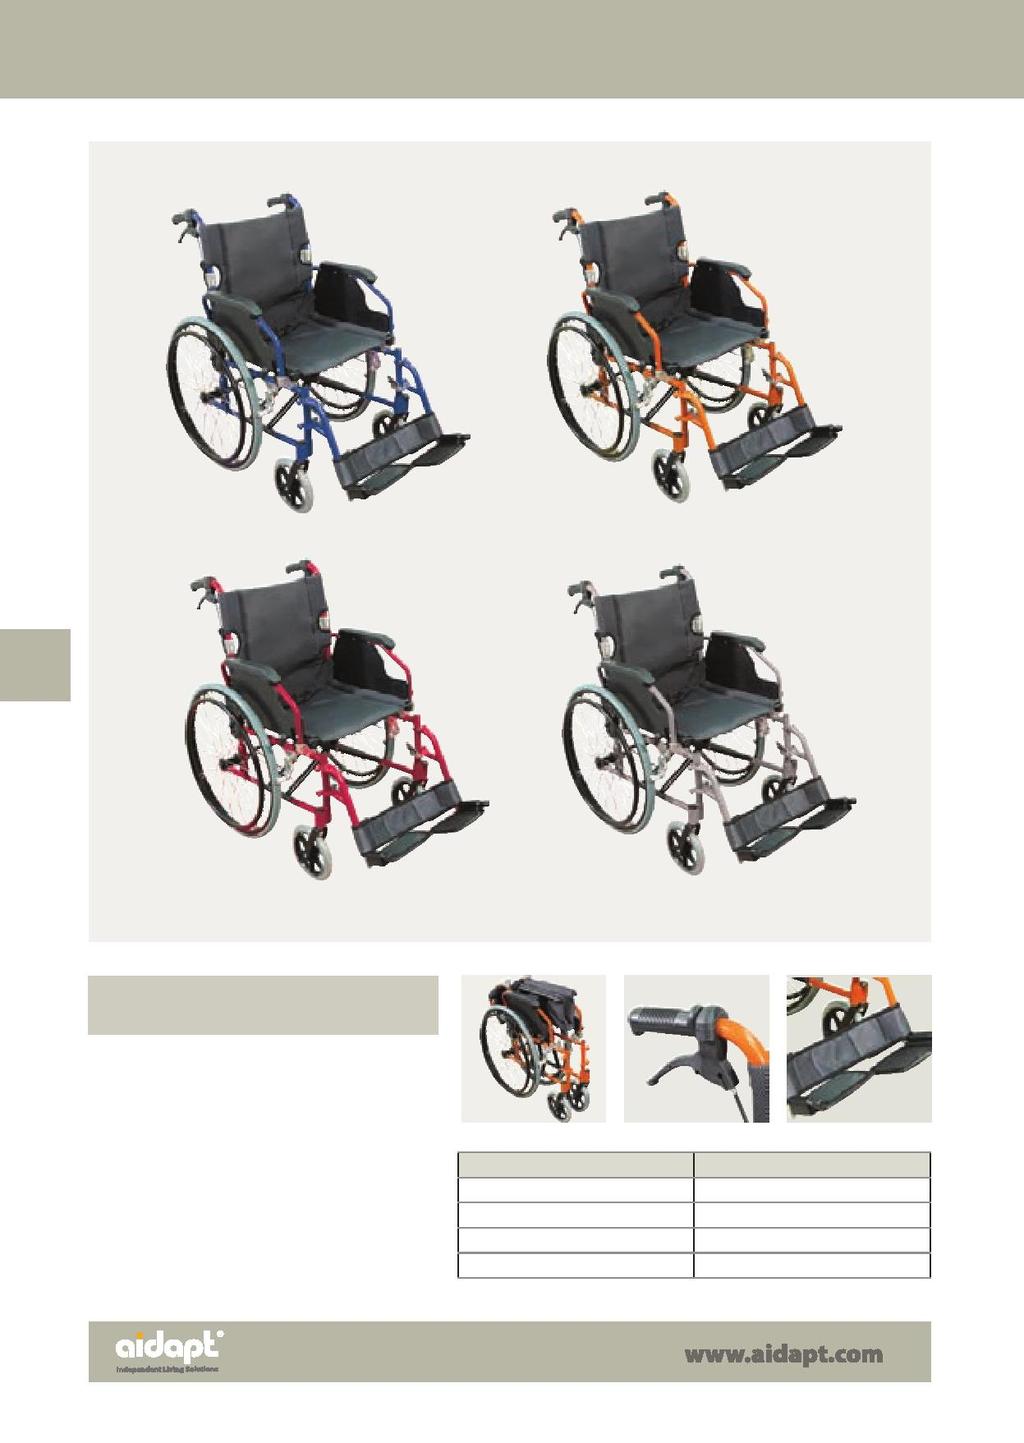 Wheelchairs 98 Deluxe Lightweight Self Propelled Aluminium Wheelchair Foldable for easy of transport and storage Lightweight and robust design Half folding backrest Side Panels for privacy Available